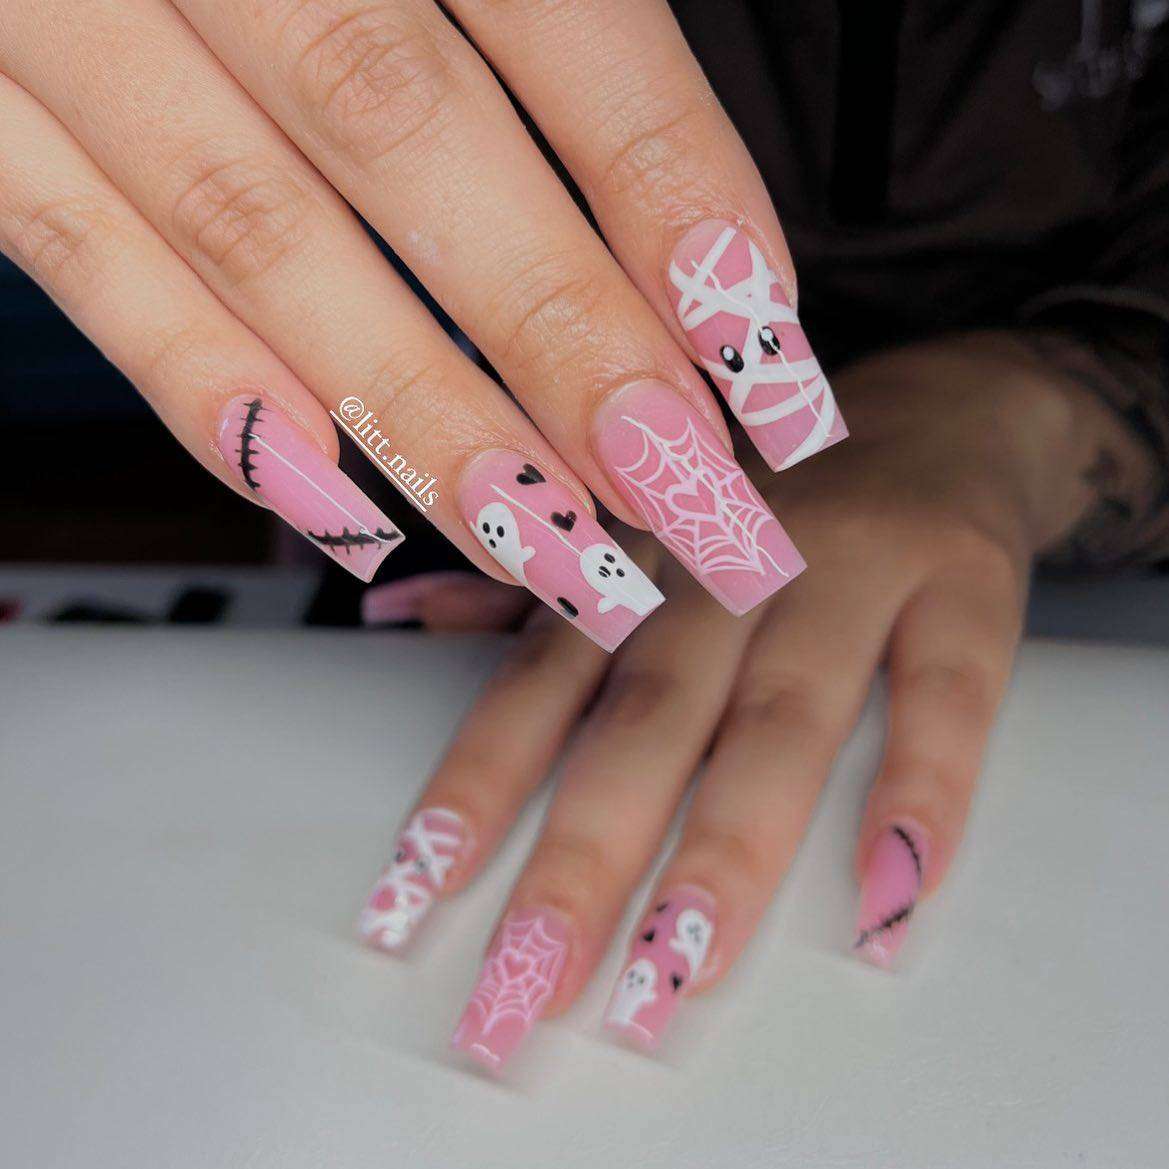 Cute Pink Halloween Nails With Black And White Nail Art